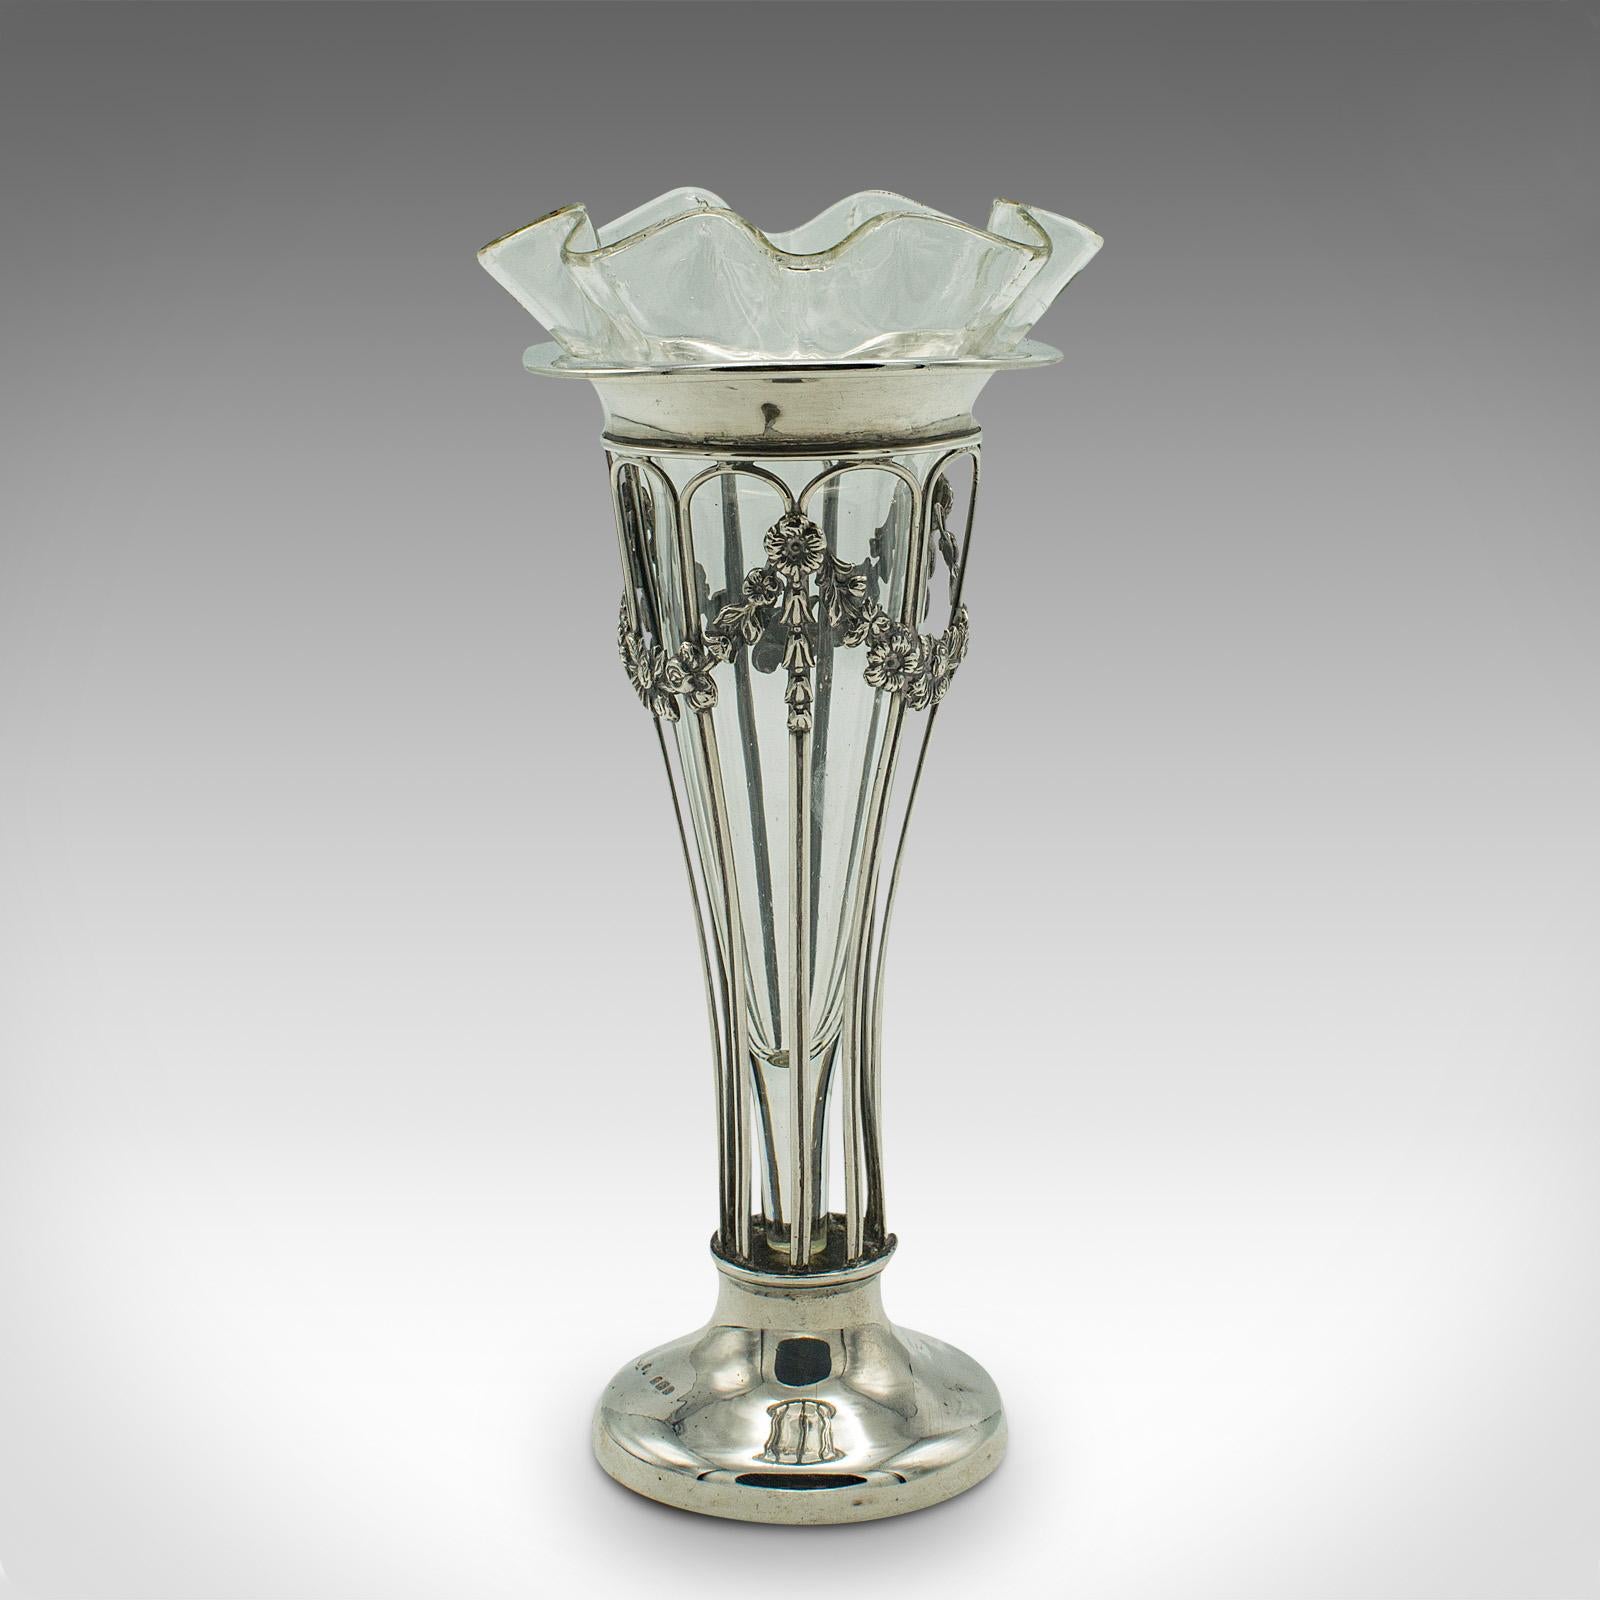 Small Antique Stem Vase, English, Silver, Glass, Decor, Art Nouveau, Edwardian In Good Condition For Sale In Hele, Devon, GB